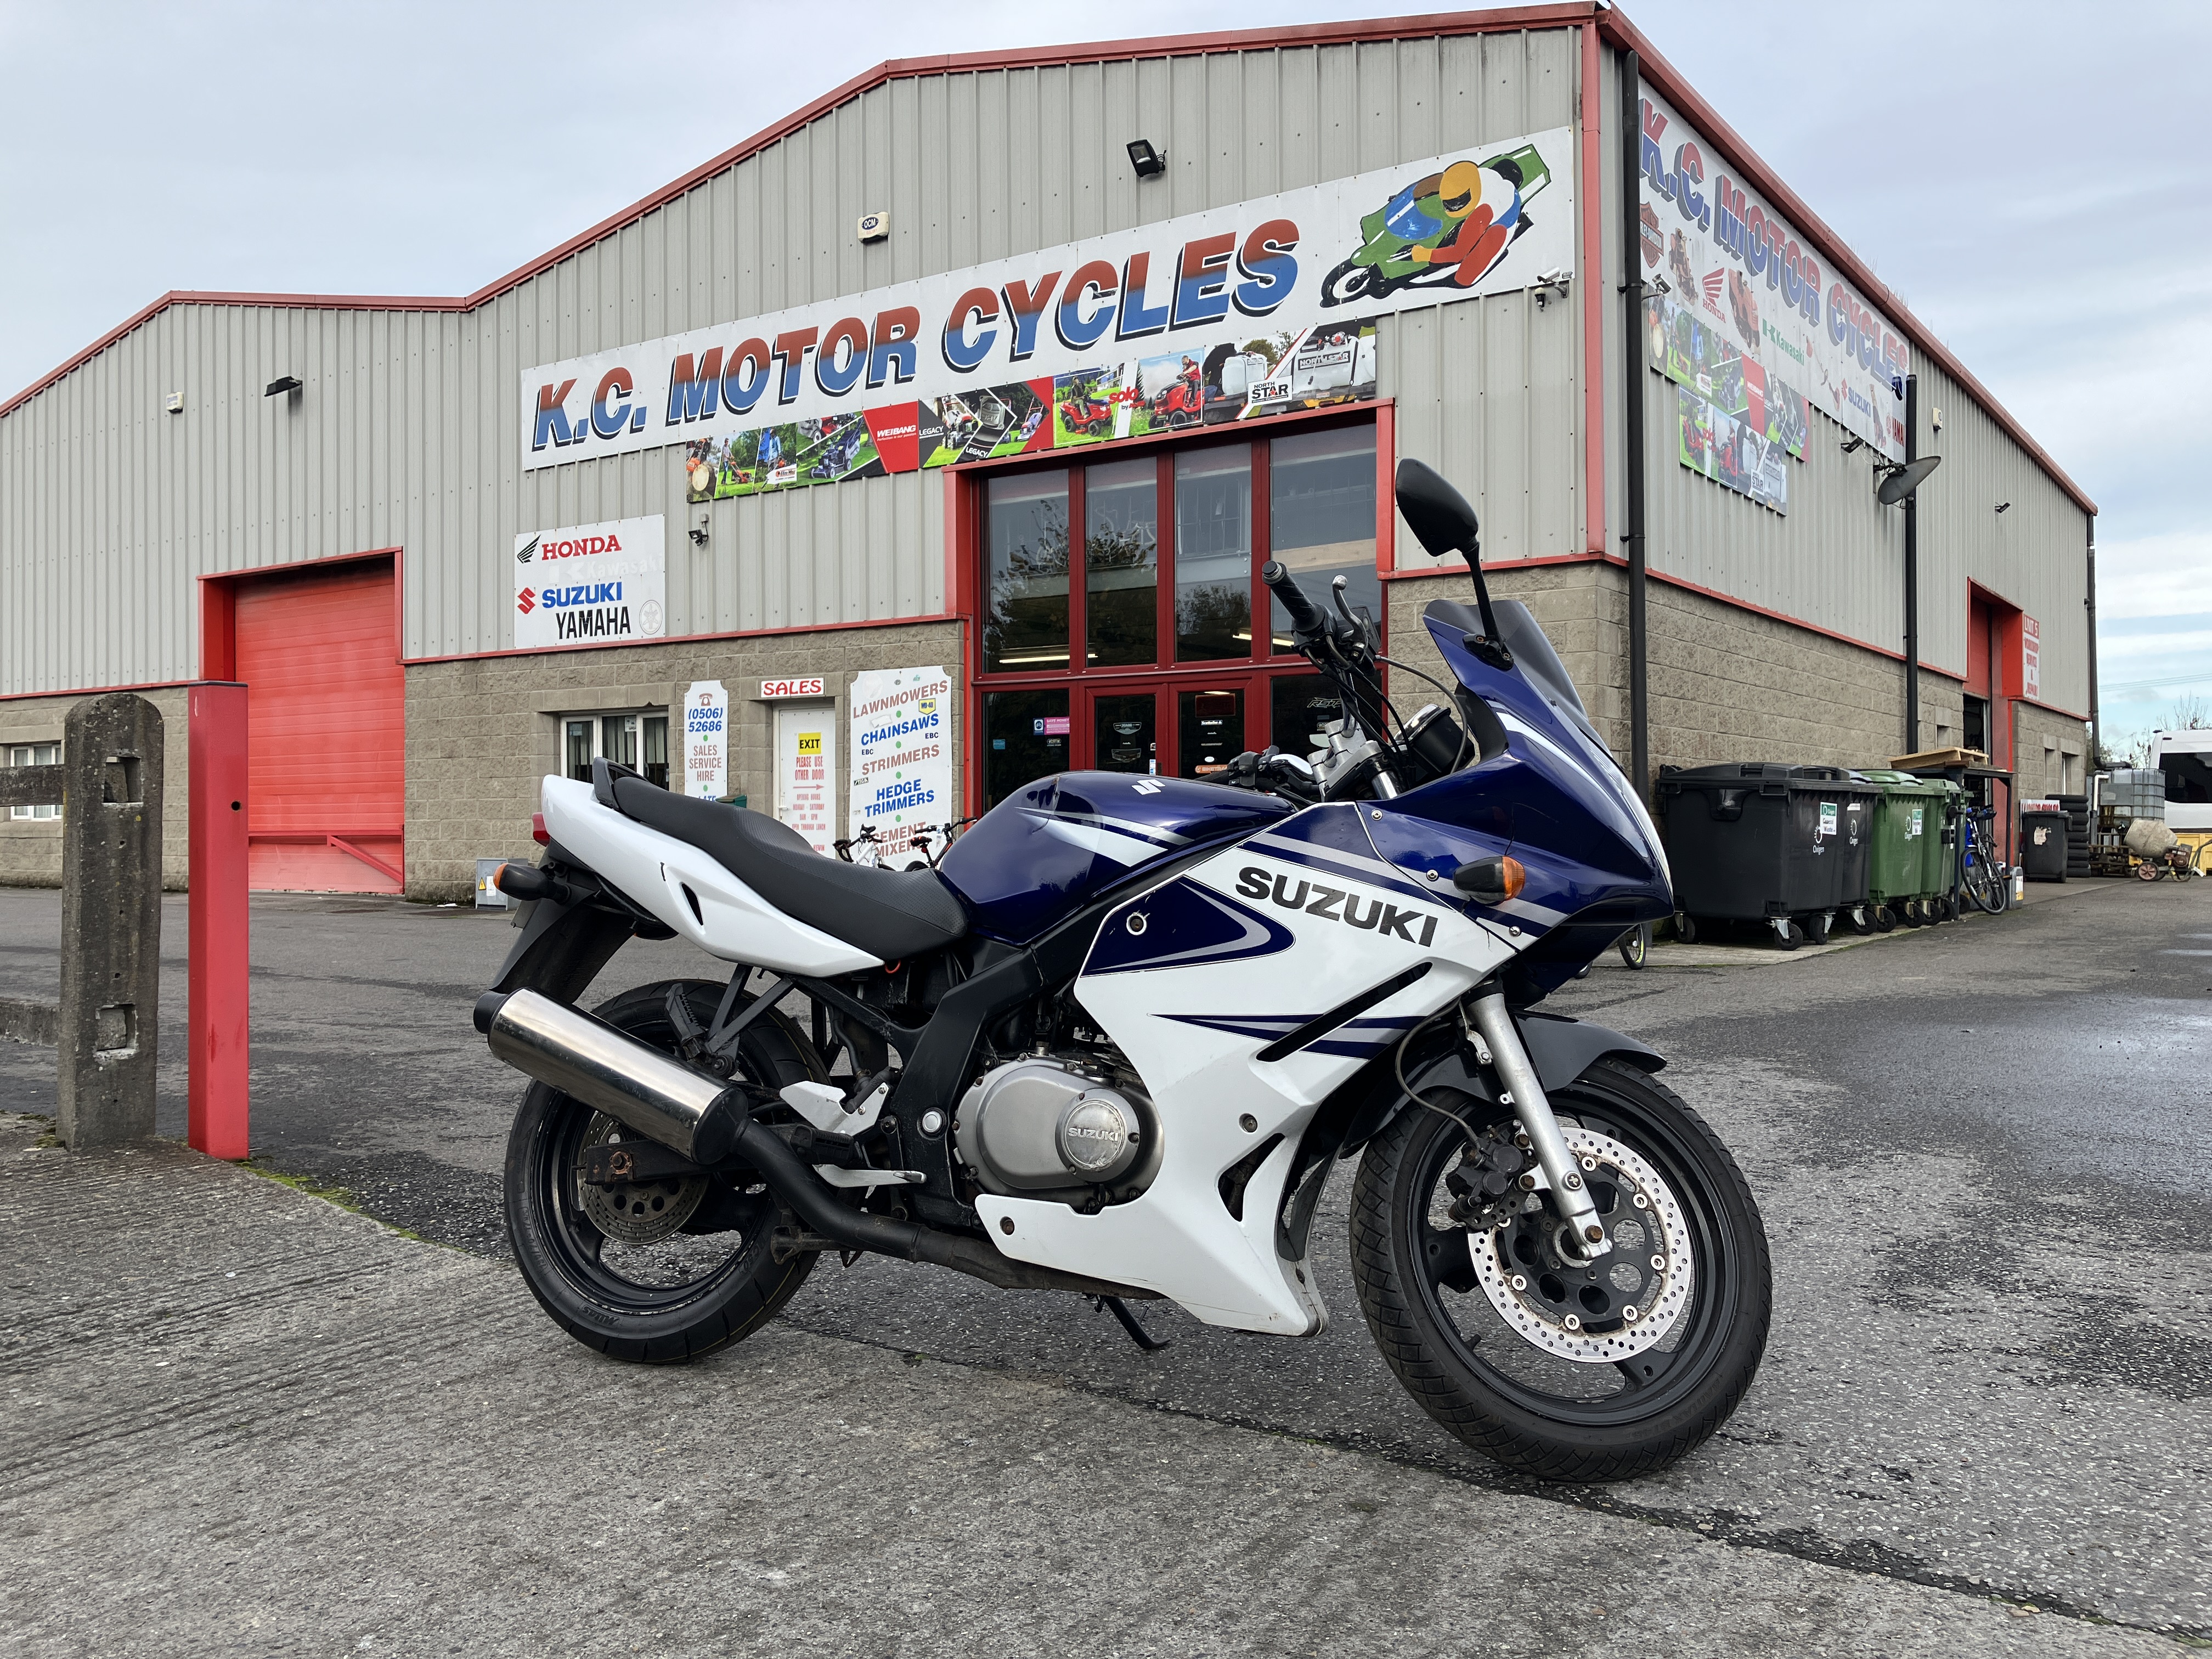 500F GS For Sale - Suzuki Motorcycles - Cycle Trader